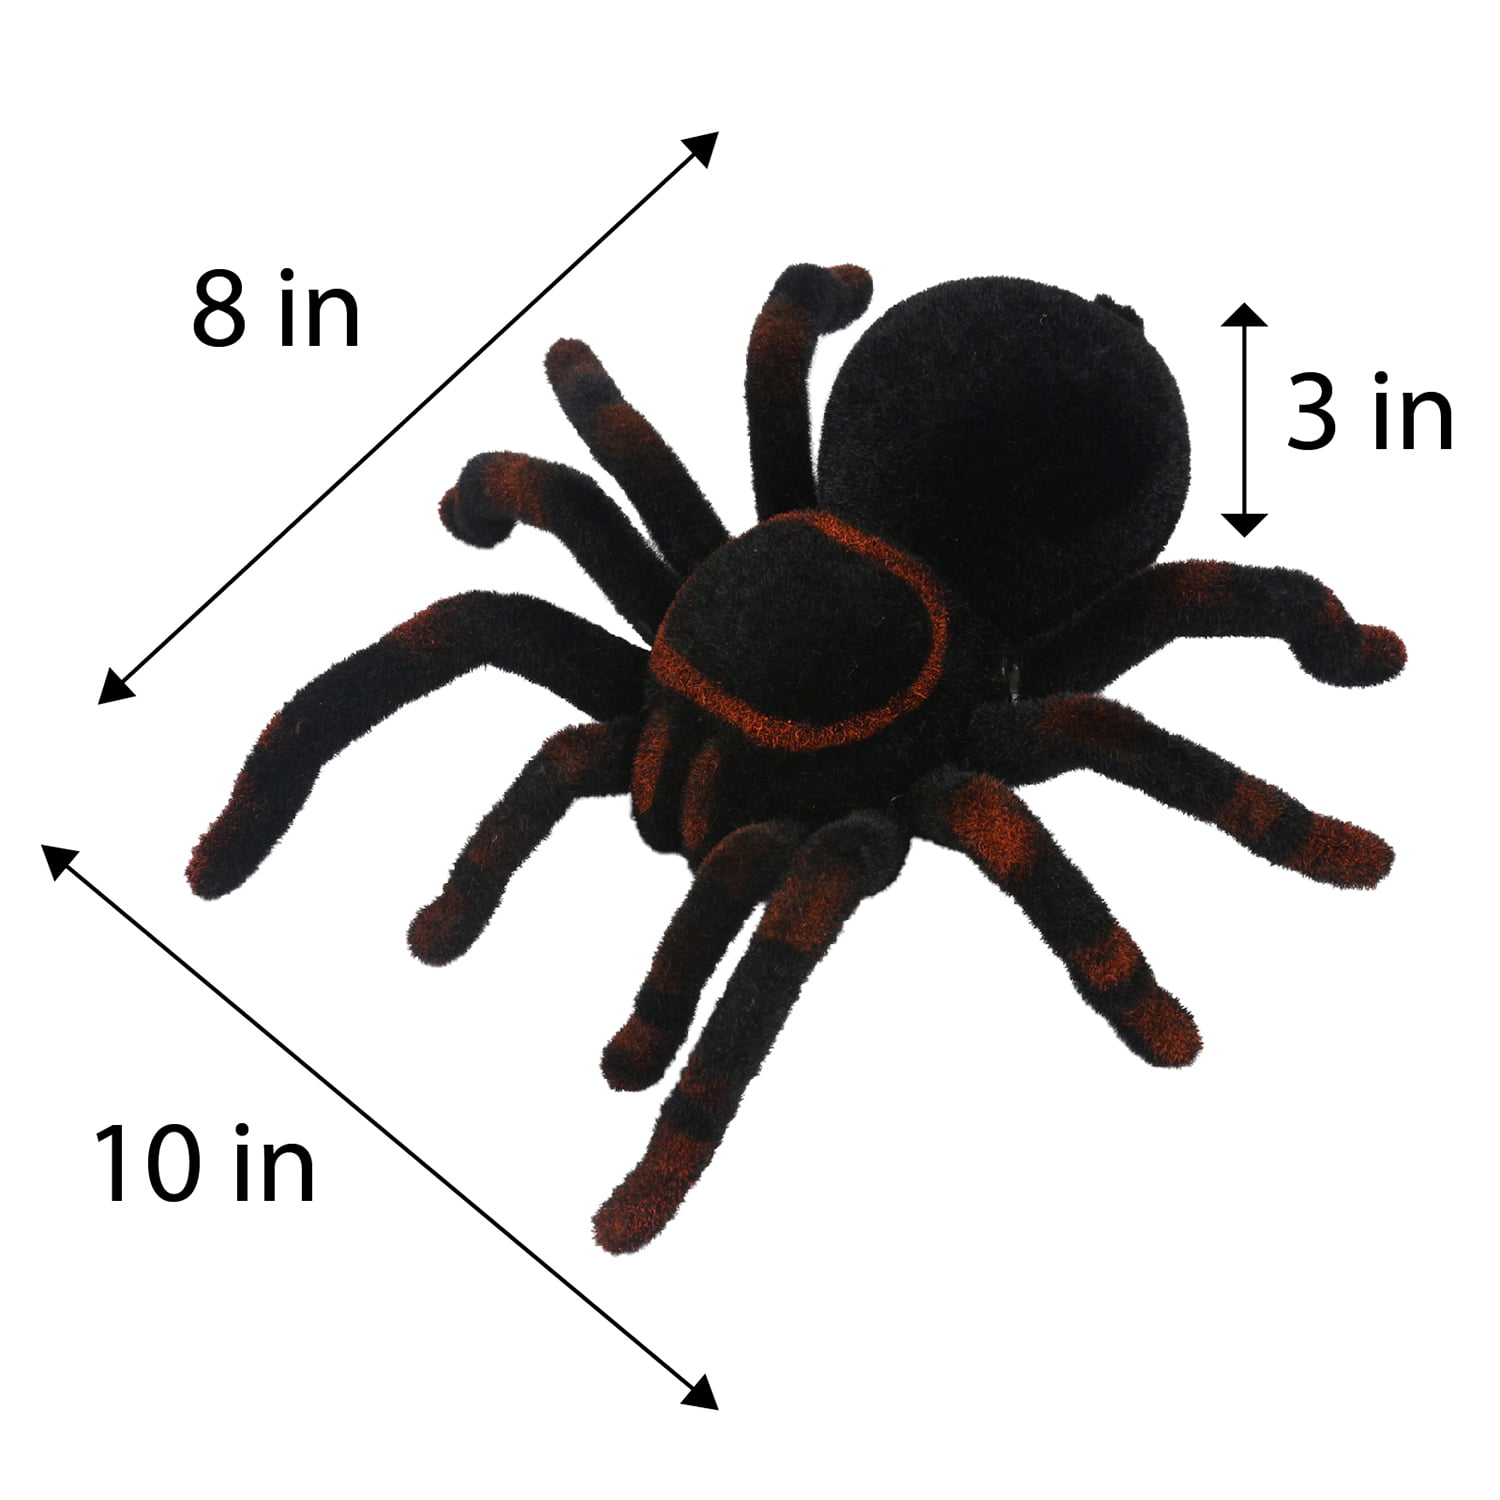 DJL Fun Realistic Giant 8" RC Tarantula 4-way Spider Remote Control Toy No Box17 for sale online 